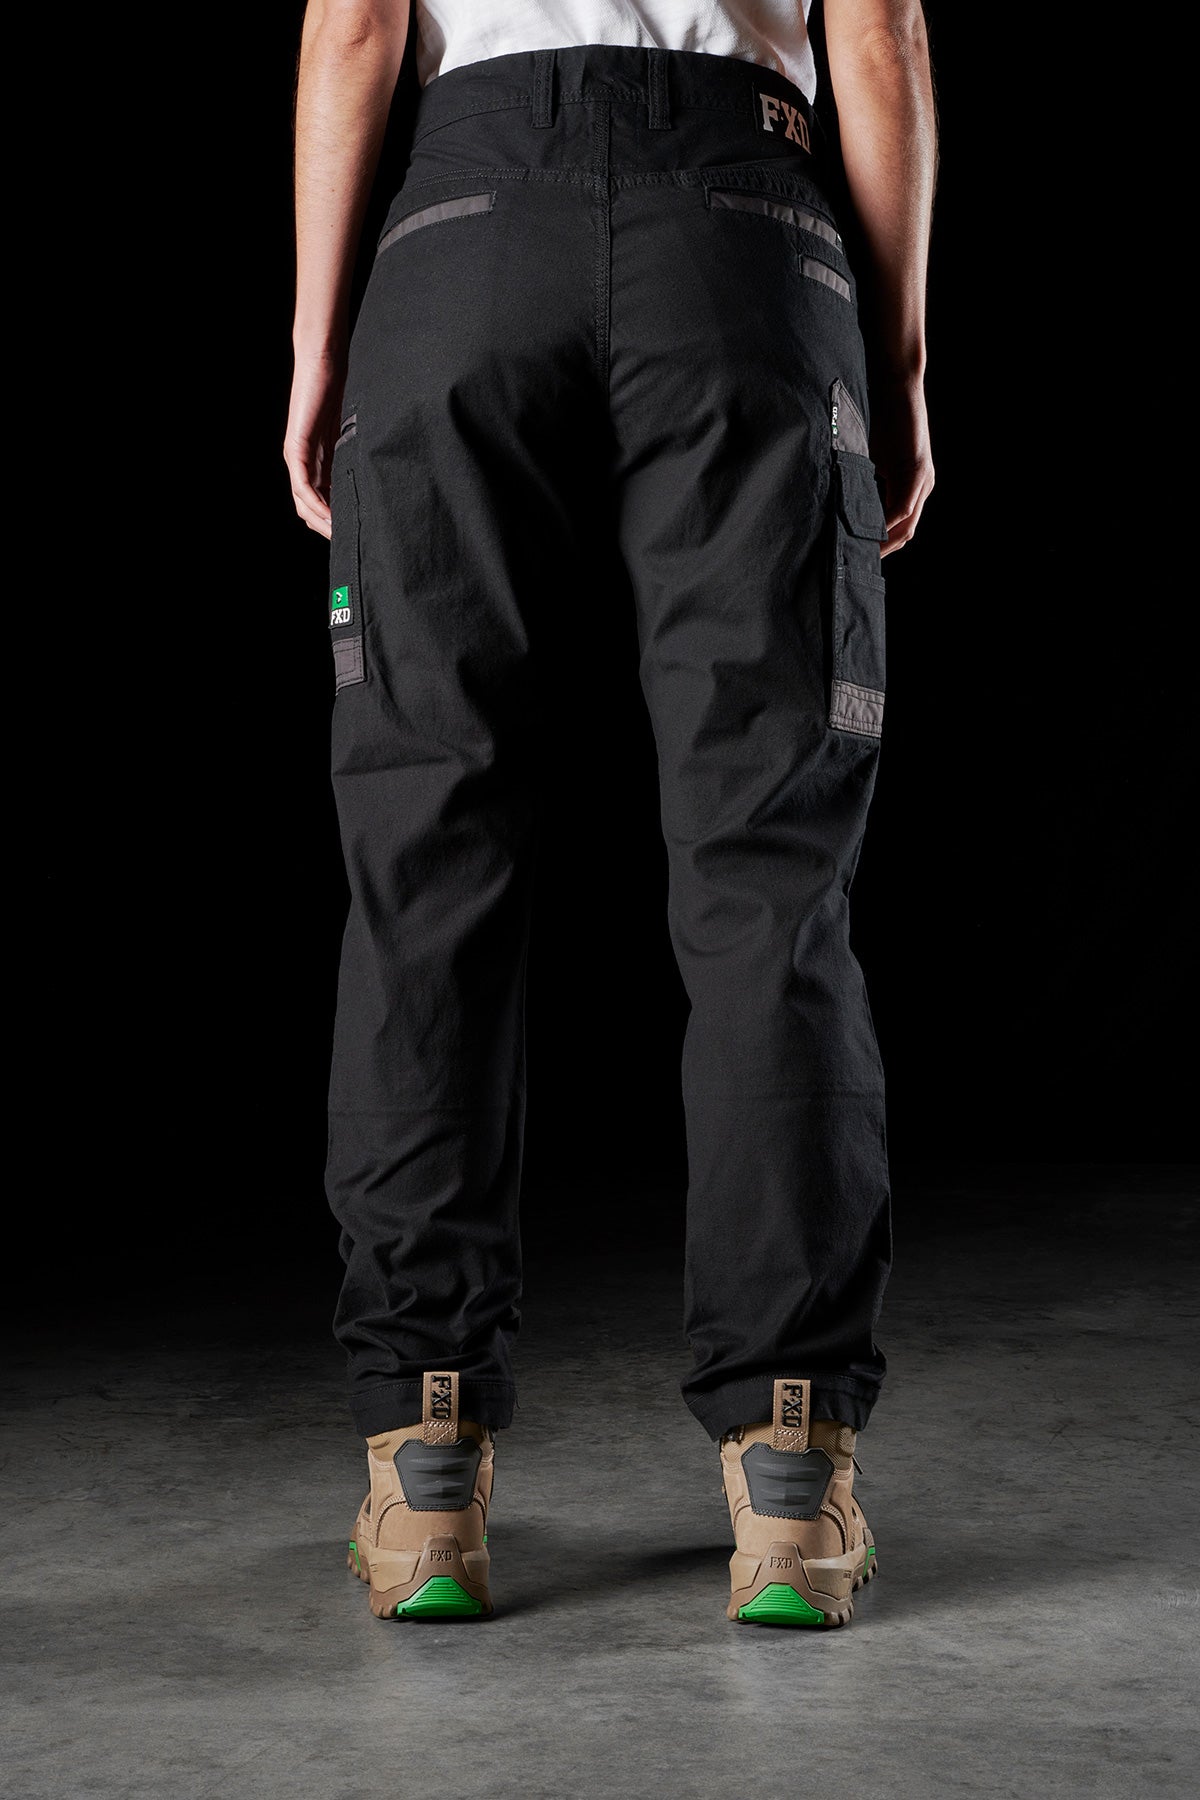 TasWeld  FXD WP-3WT Ladies Stretch Taped Work Pants